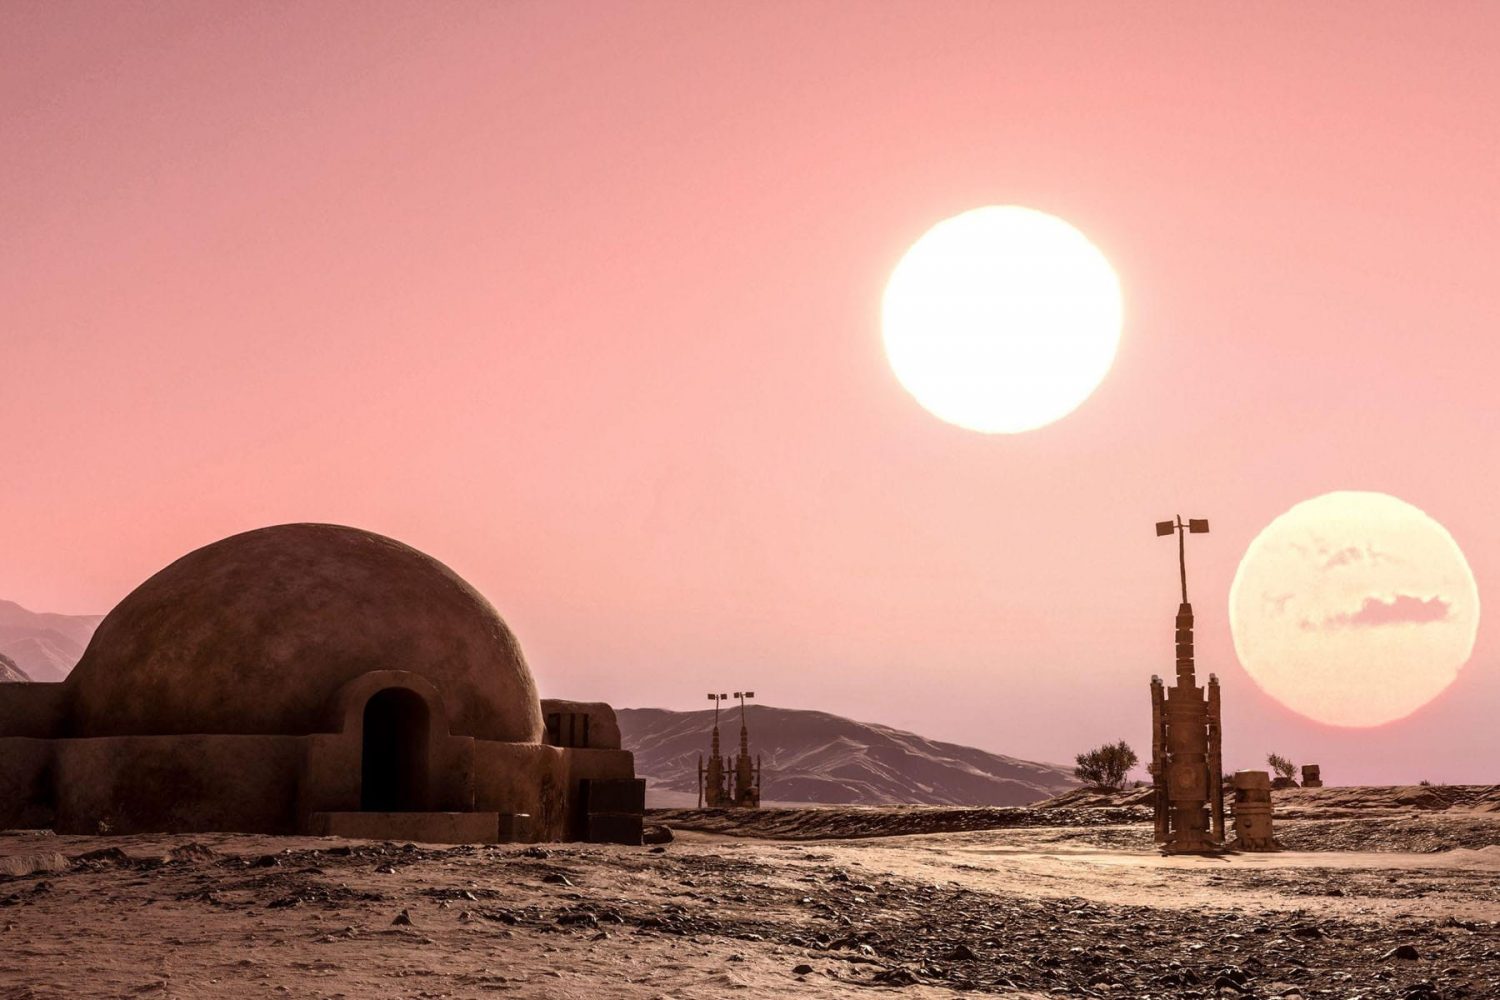 Star Wars and Tatooine Planet. 